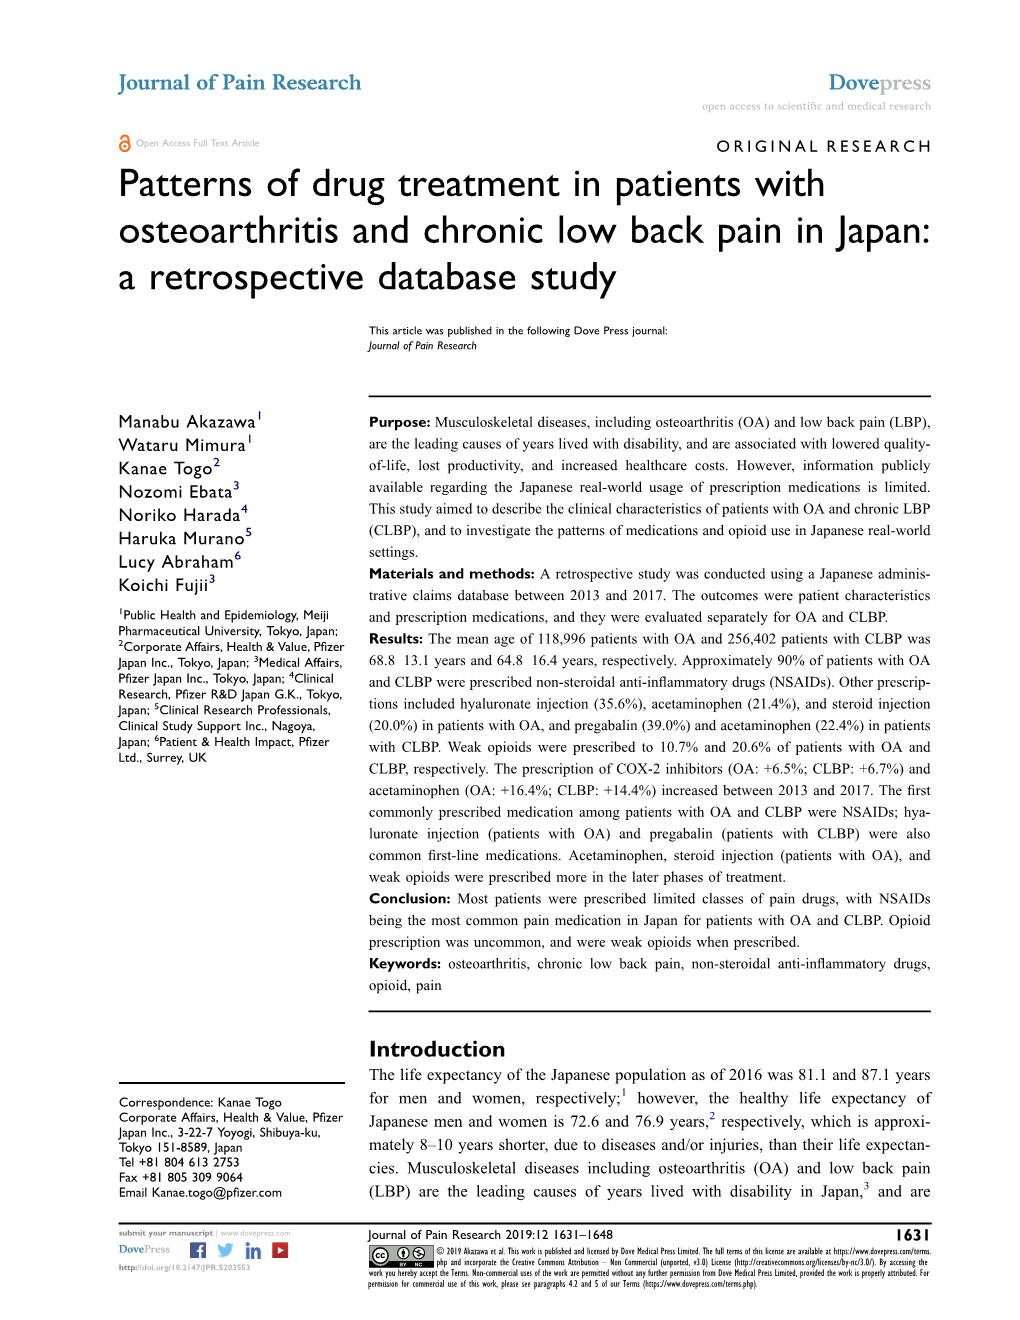 Patterns of Drug Treatment in Patients with Osteoarthritis and Chronic Low Back Pain in Japan: a Retrospective Database Study